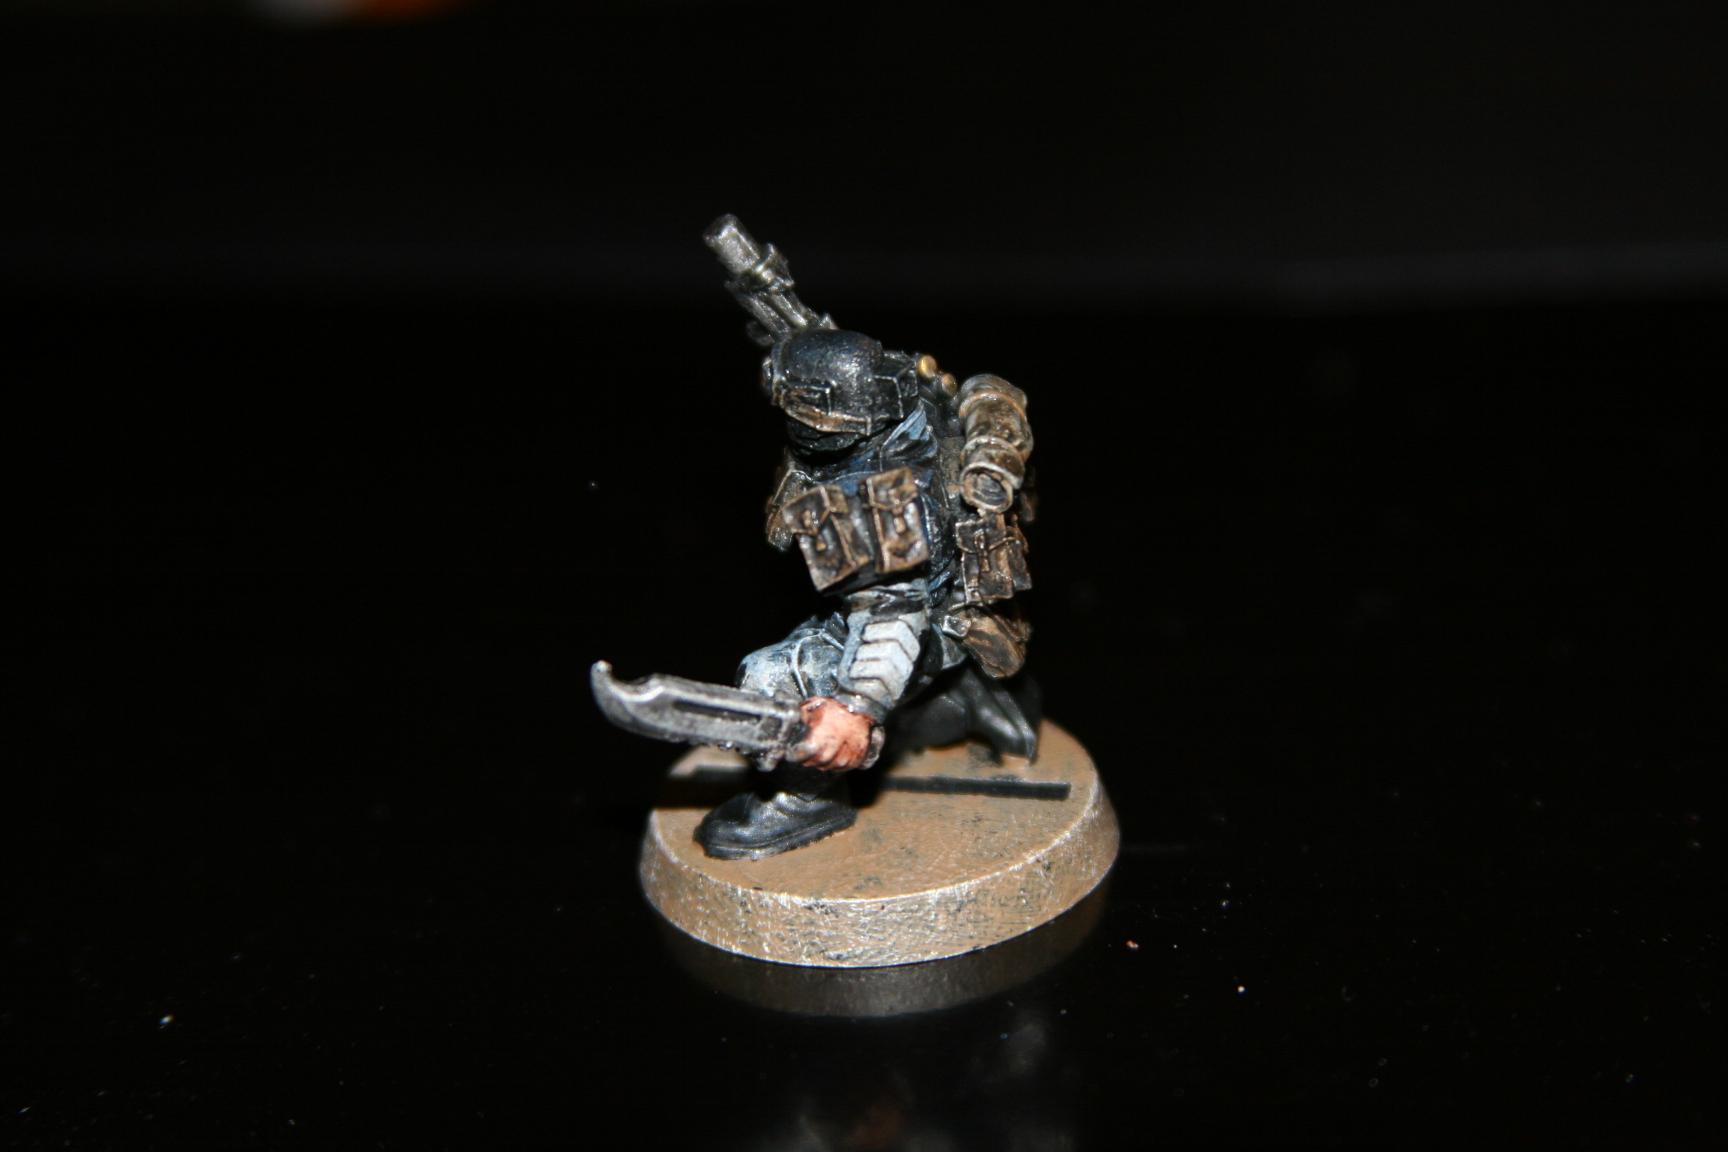 Another side shot of Marbo